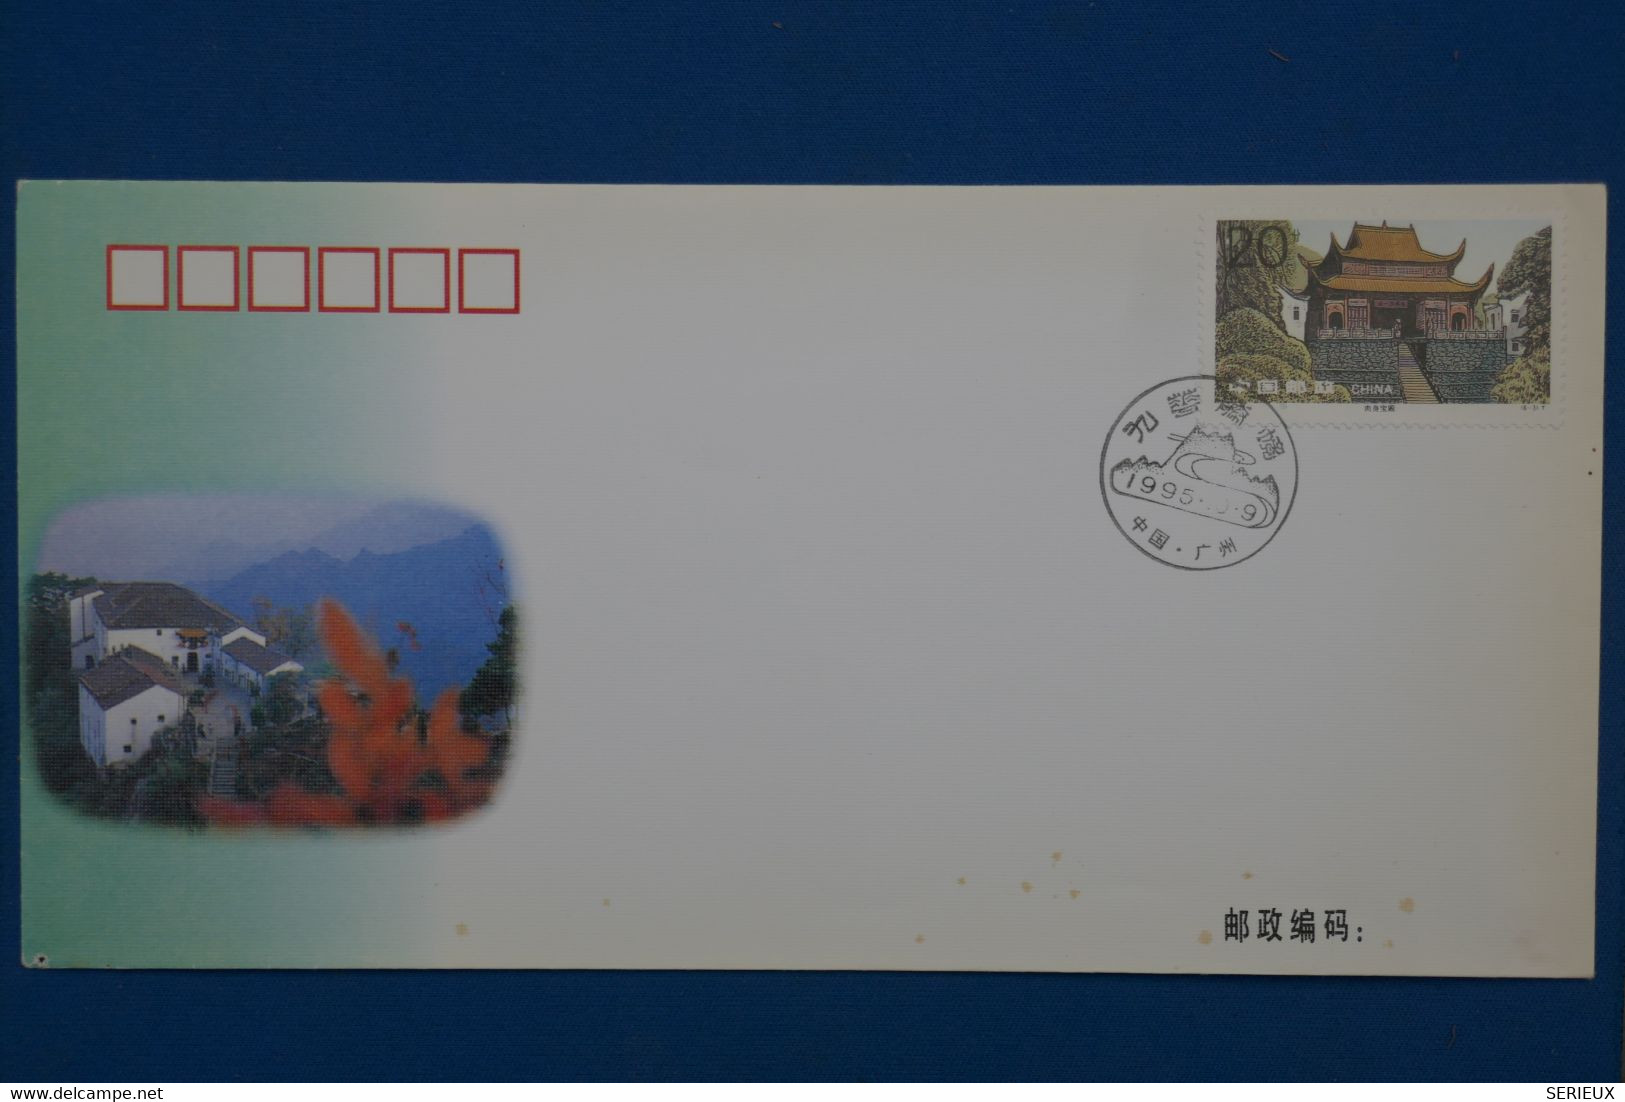 W12 CHINA BELLE LETTRE FDC   1995  CHINE NON VOYAGEE + AFFRANCH. PLAISANT - Lettres & Documents